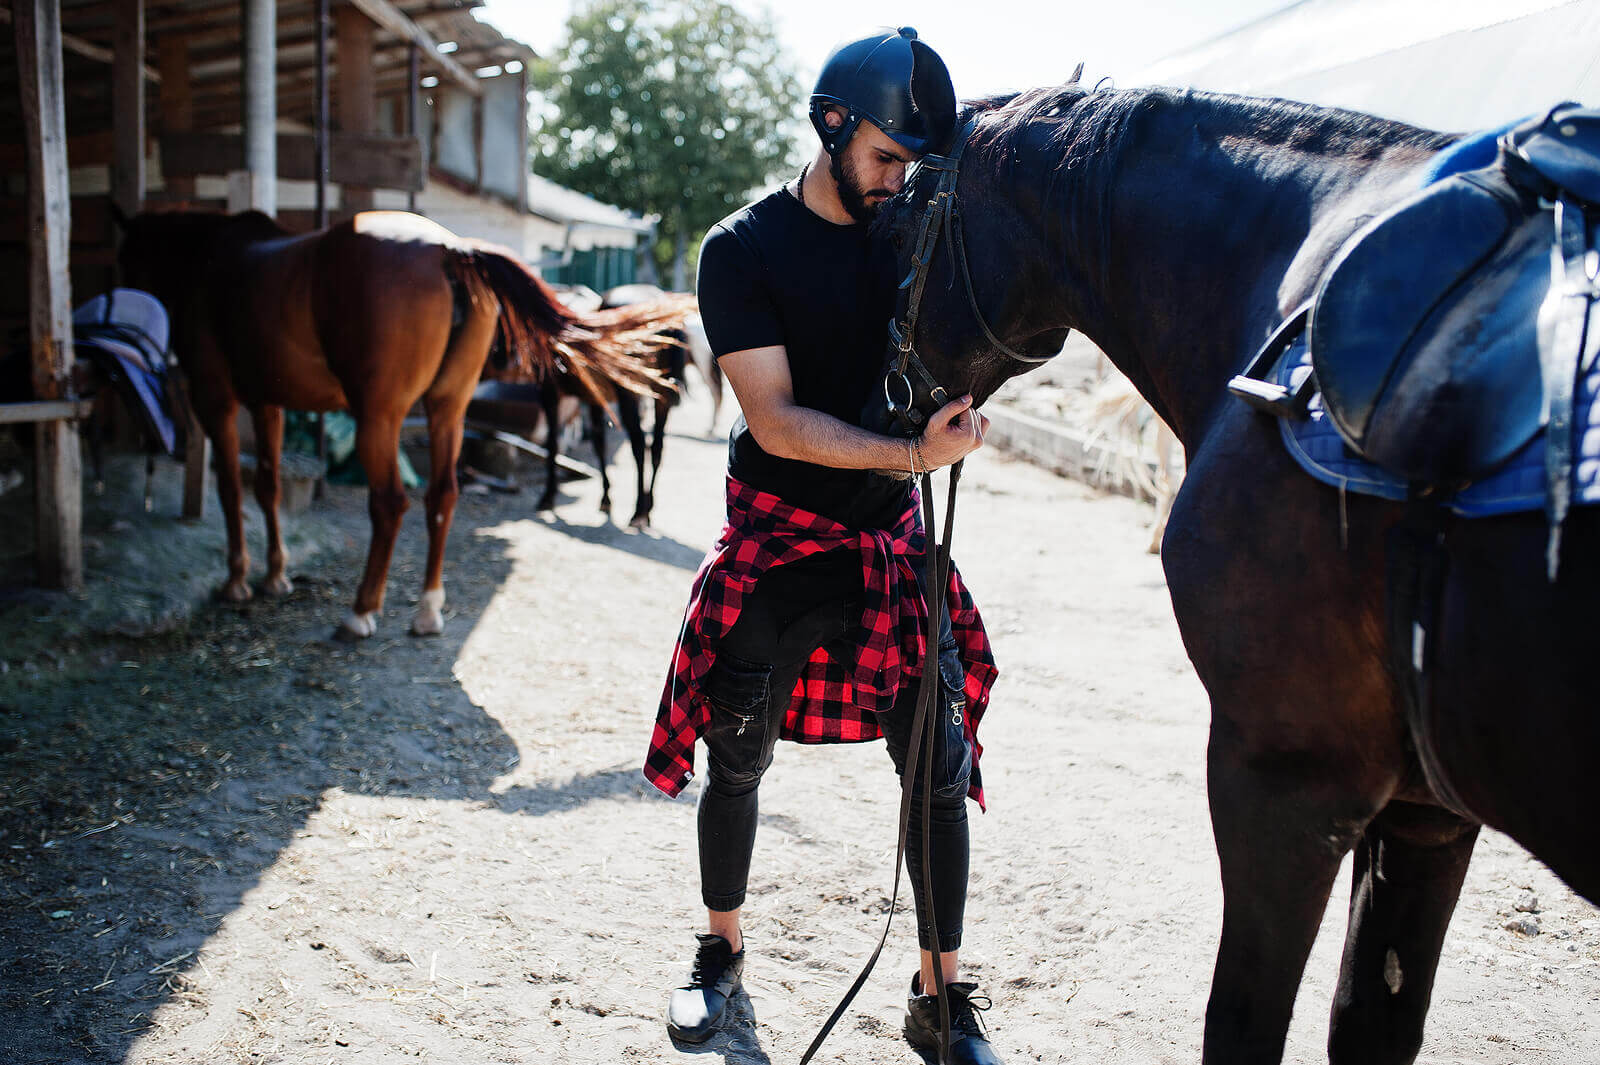 Image of a person about to ride a horse. This person could benefit from equestrian therapy in New Jersey. A trauma therapist in scotch plains, nj can help in equestrian related trauma therapy. (07076.)